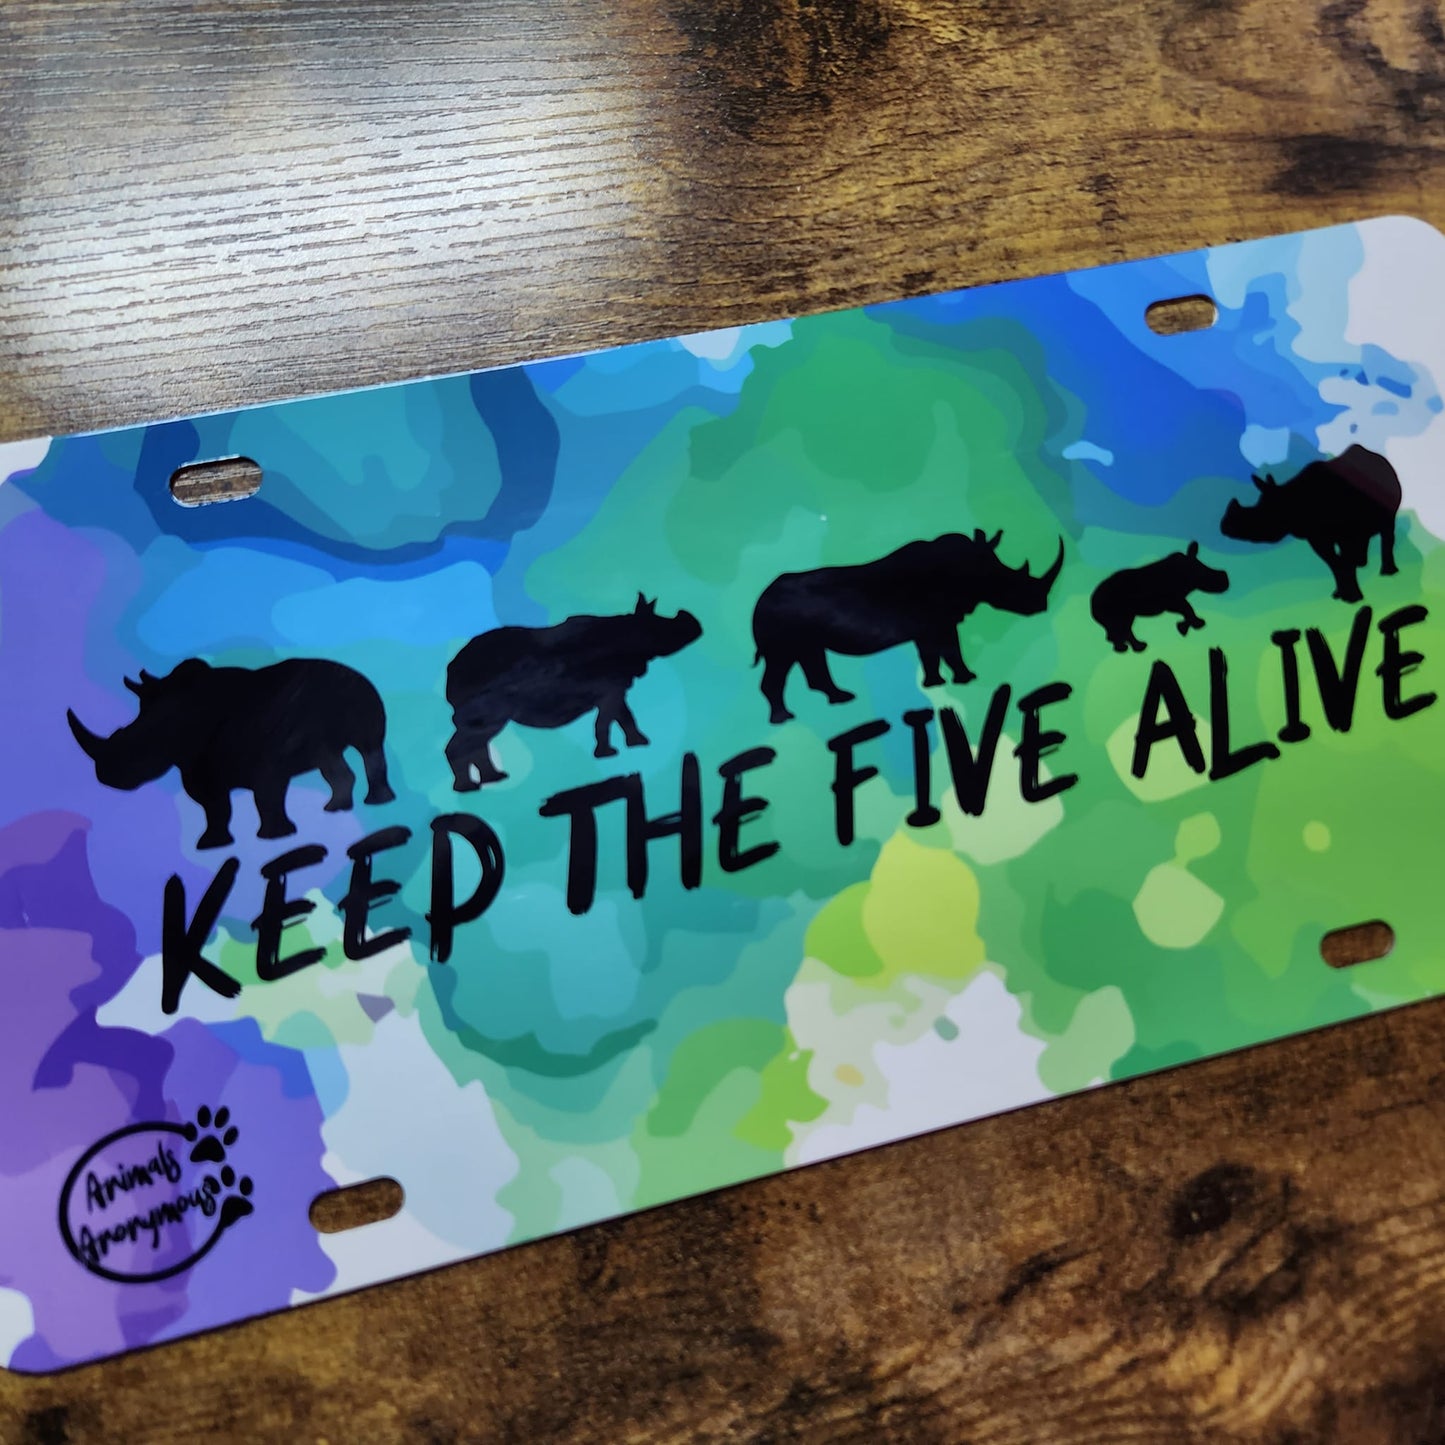 Rhino - Keep the Five Alive Purple/Blue/Green Splatter - Full License Plate (Made to Order)